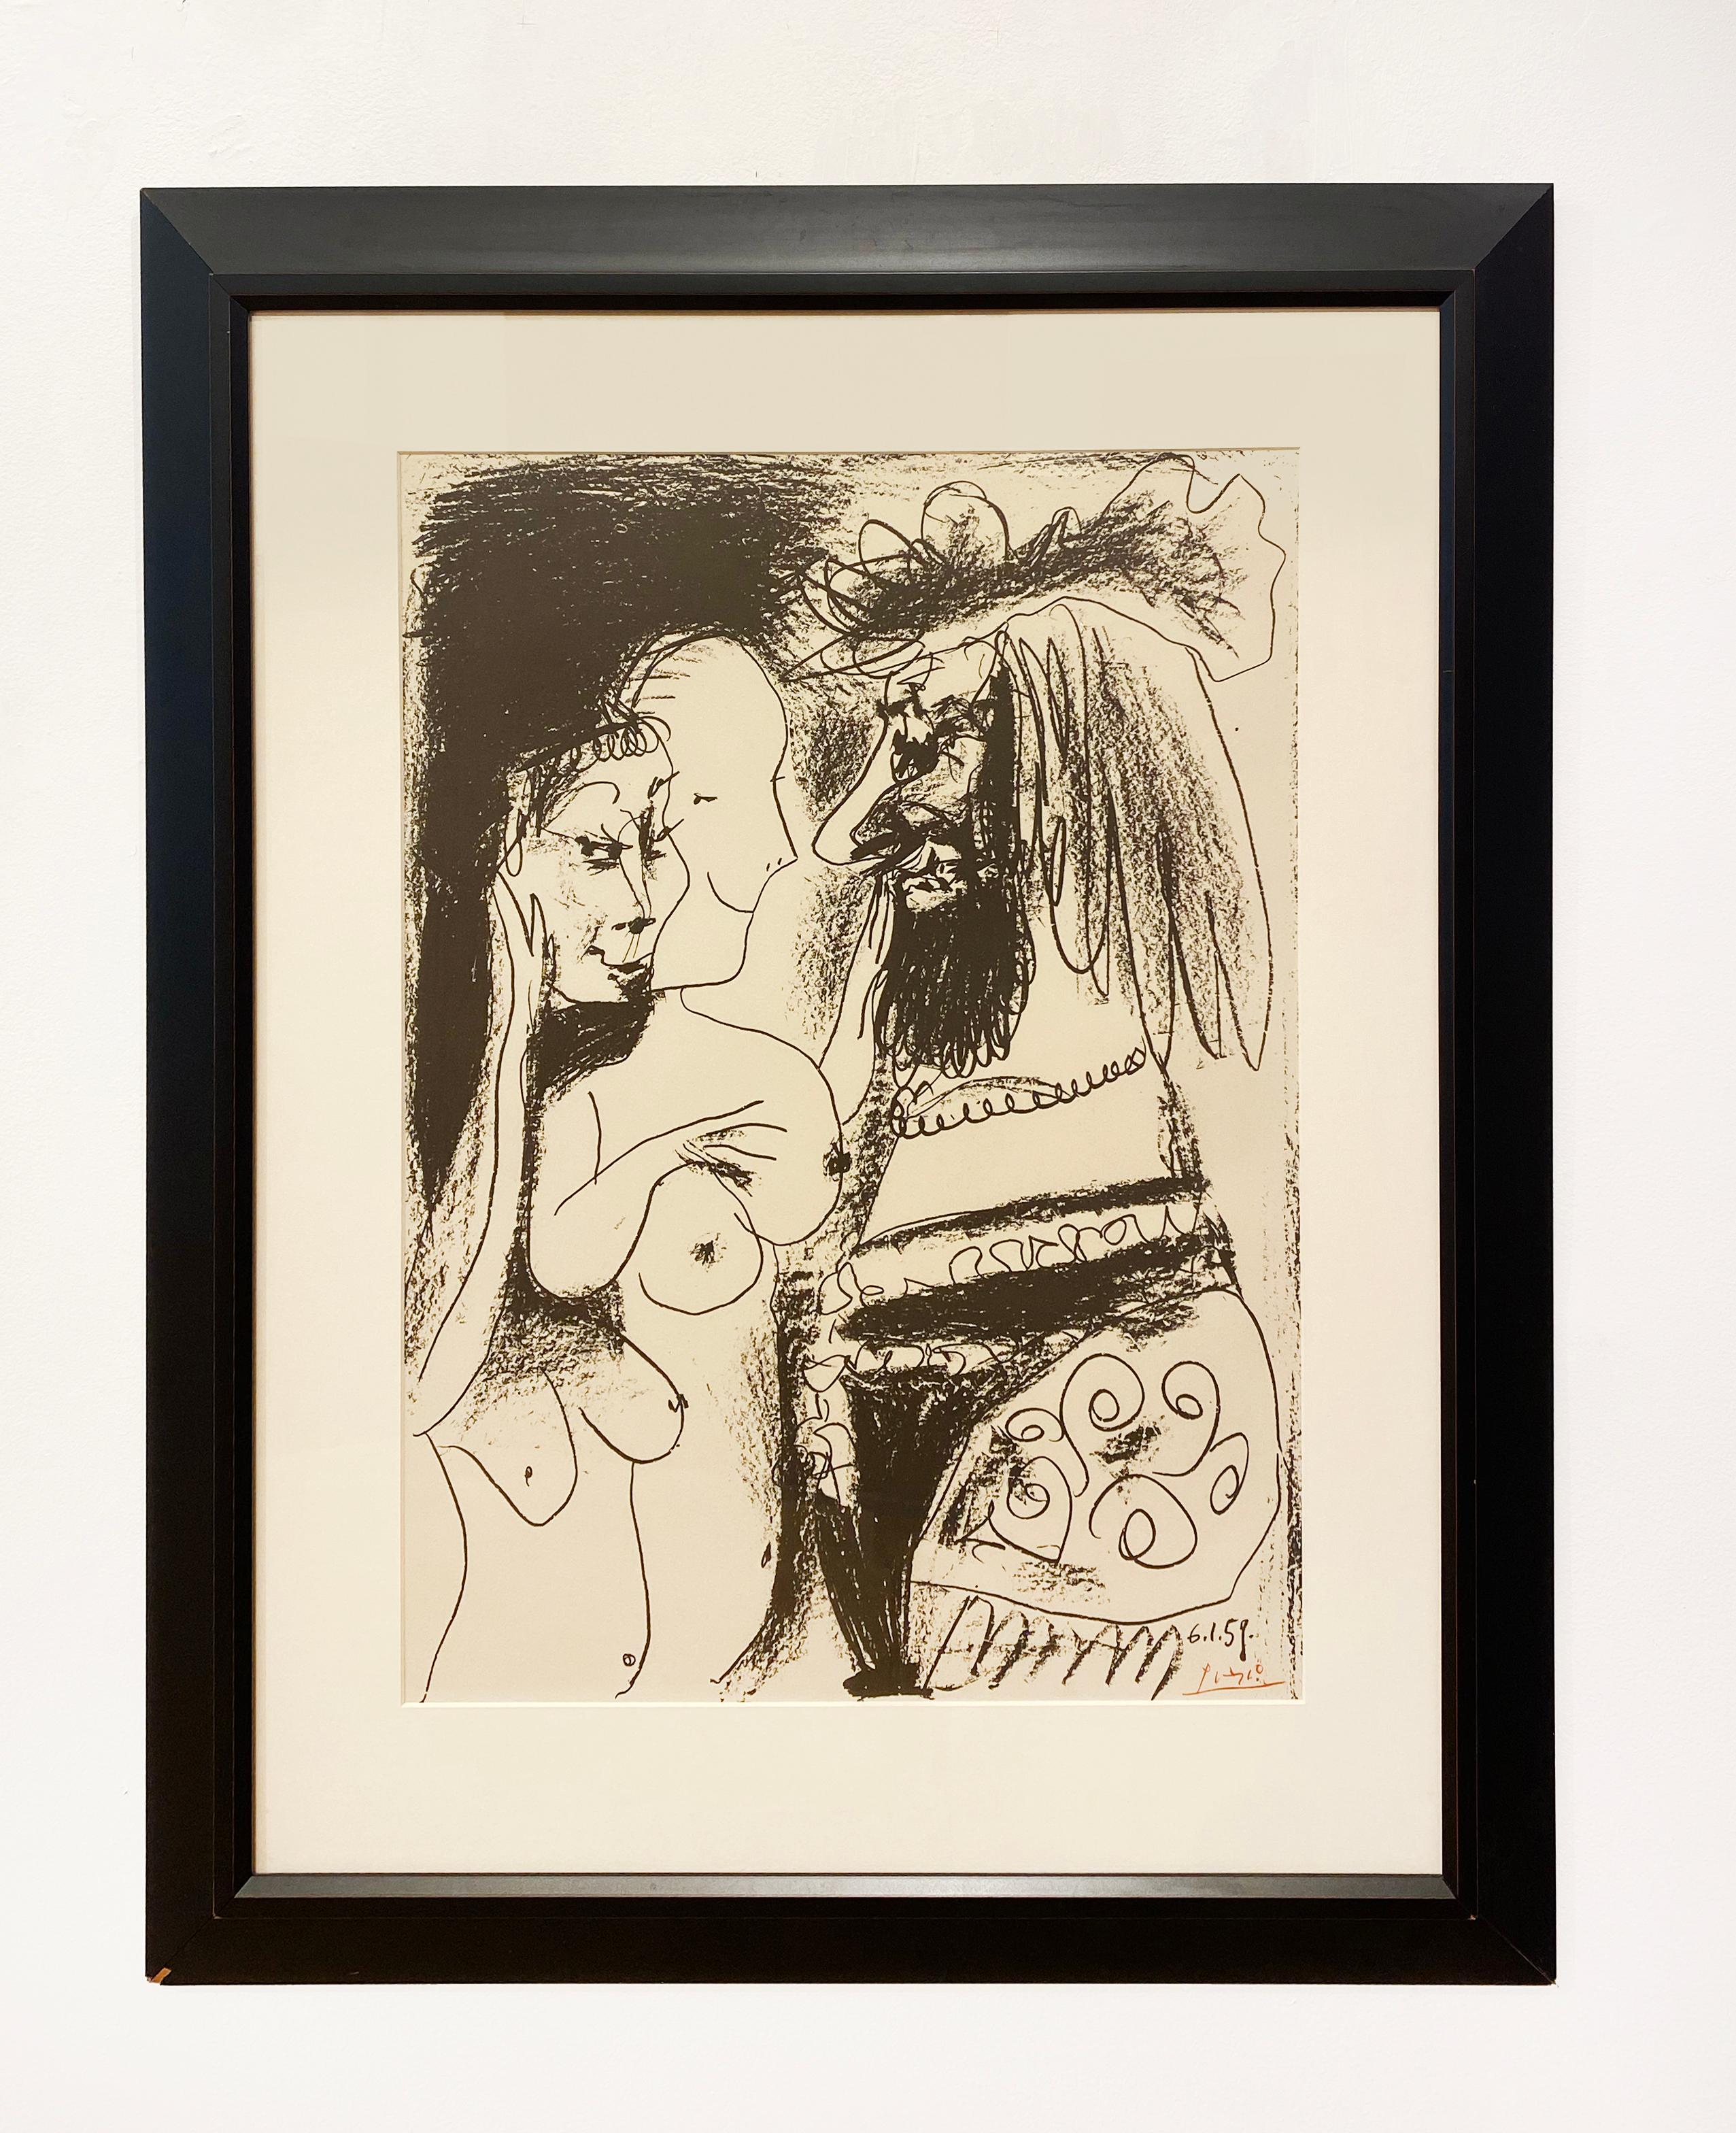 The Old King (Le Vieux Roi) - Modern Print by Pablo Picasso